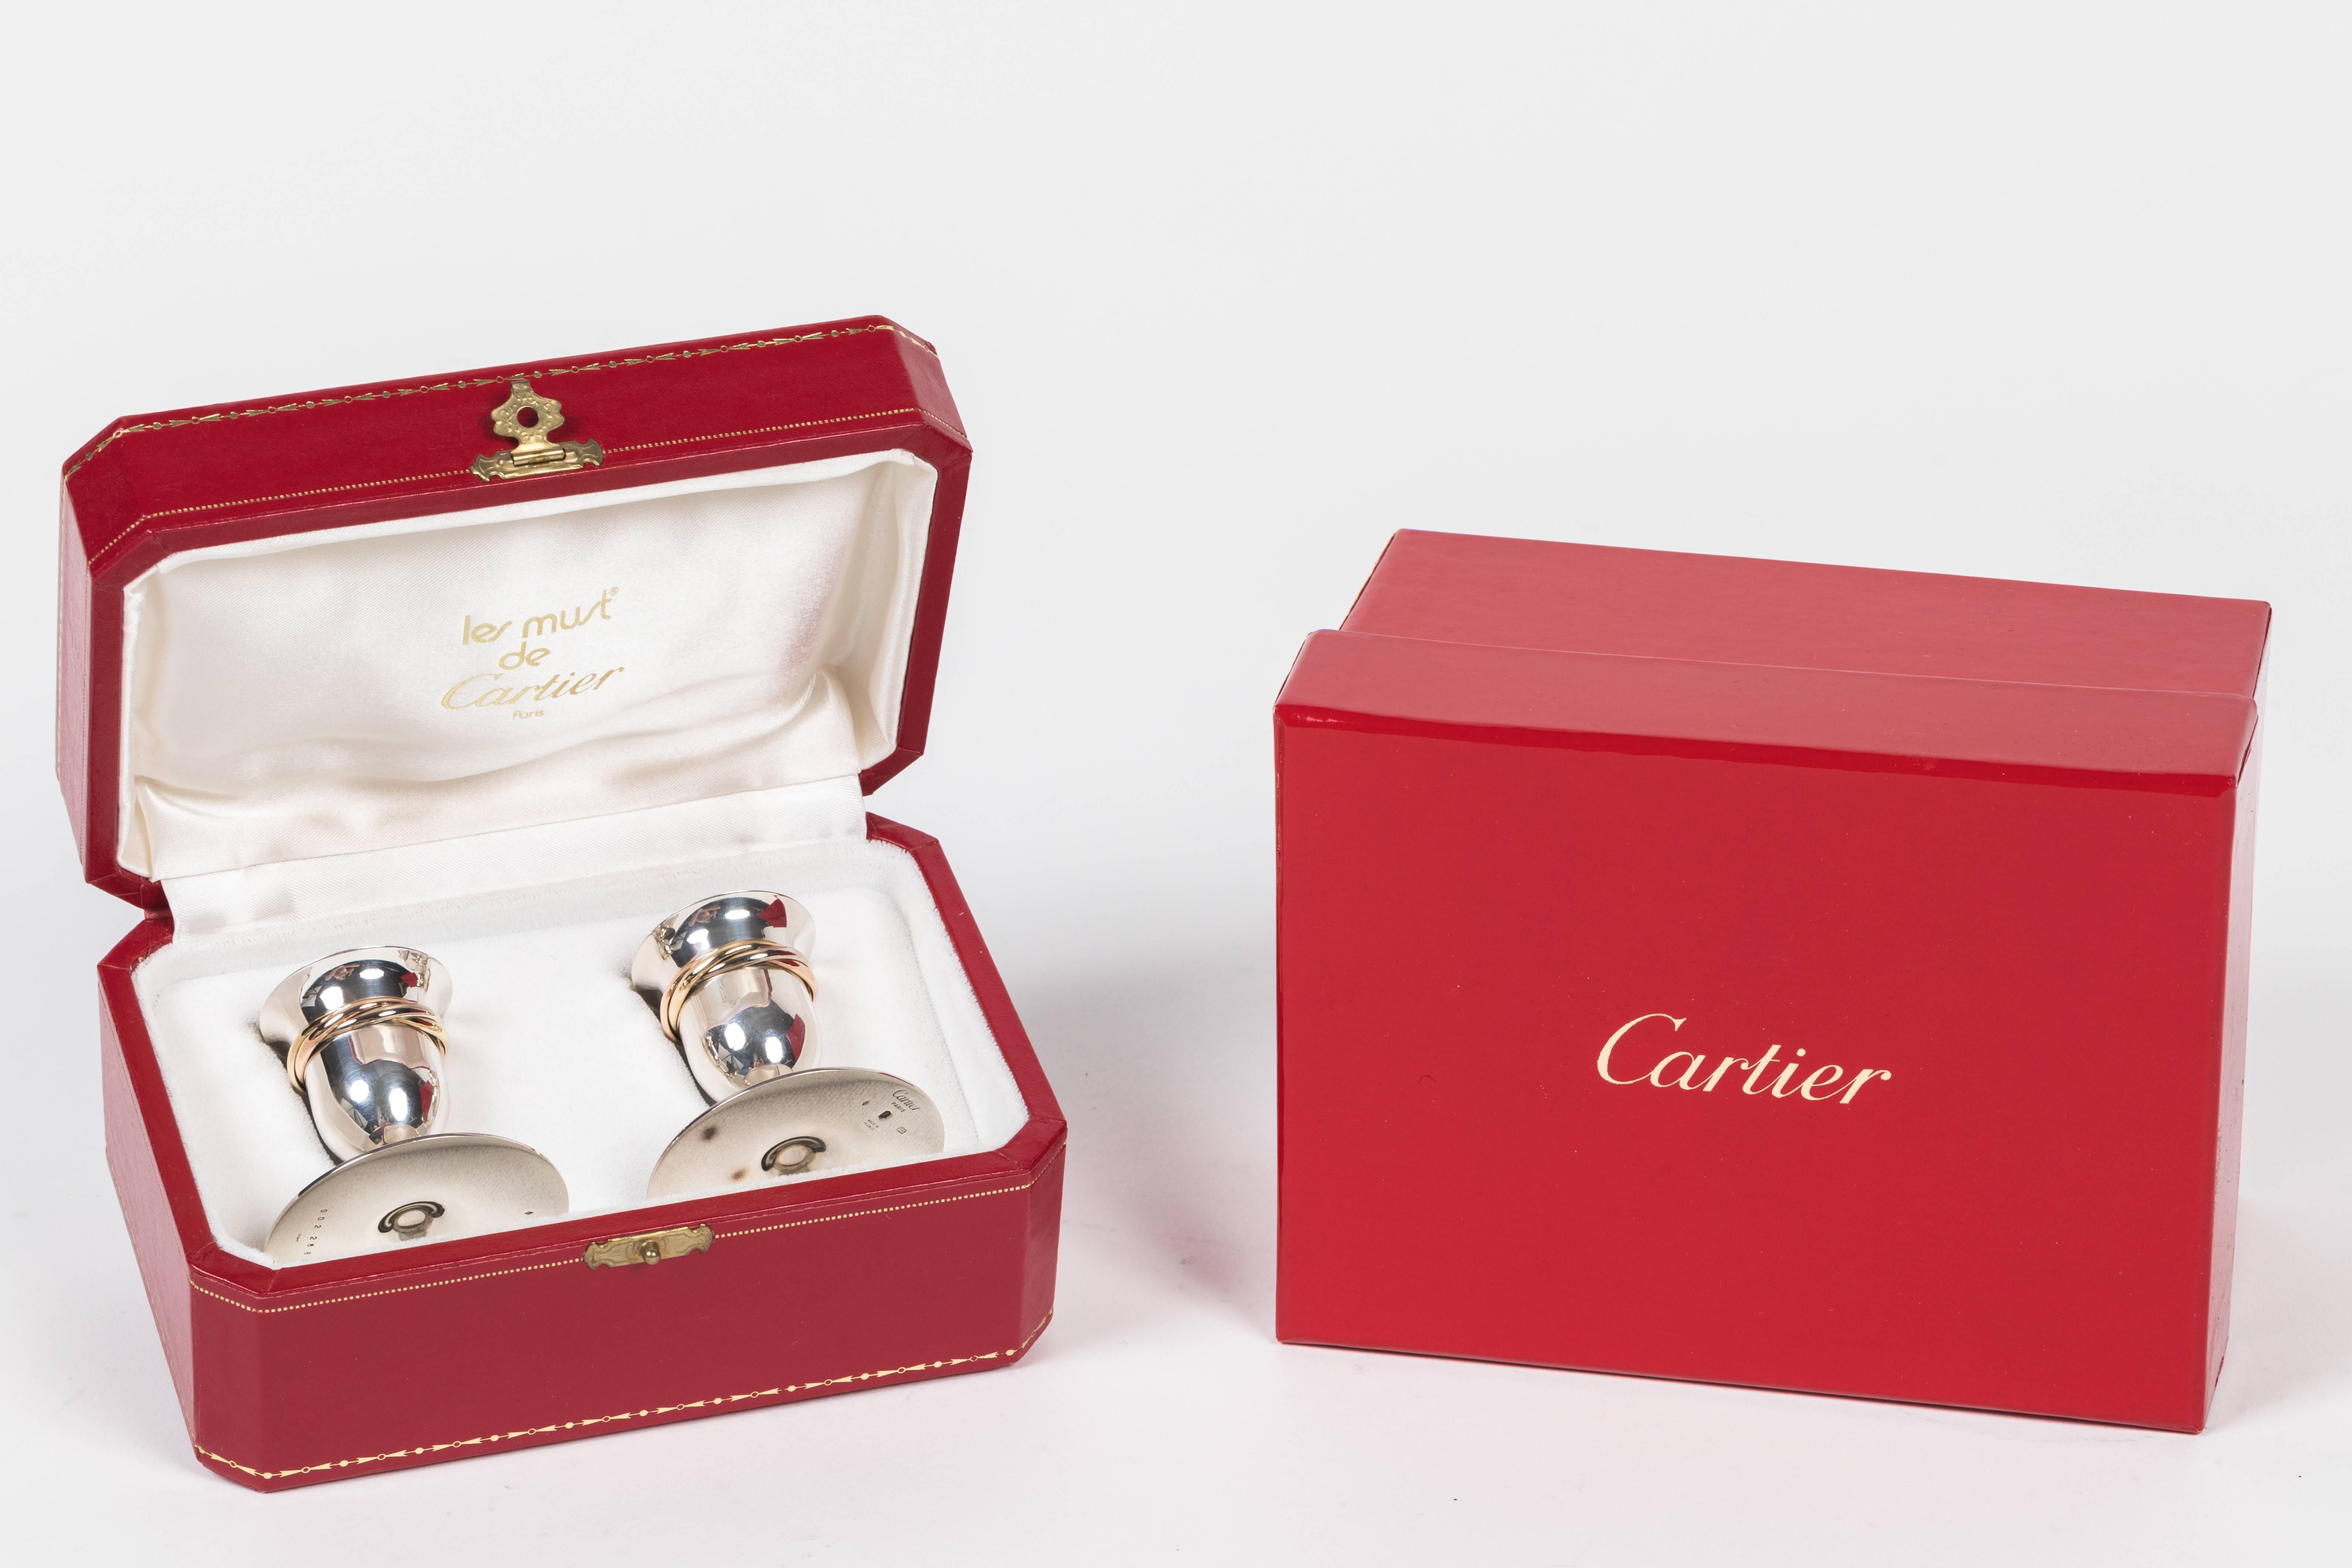 Wonderful pair of candleholders in sterling silver featuring the addition of tri-color rolling rings to each holder. We have both the original presentation box as well as the red Cartier outer gift box. Ready for holiday gift giving!
   